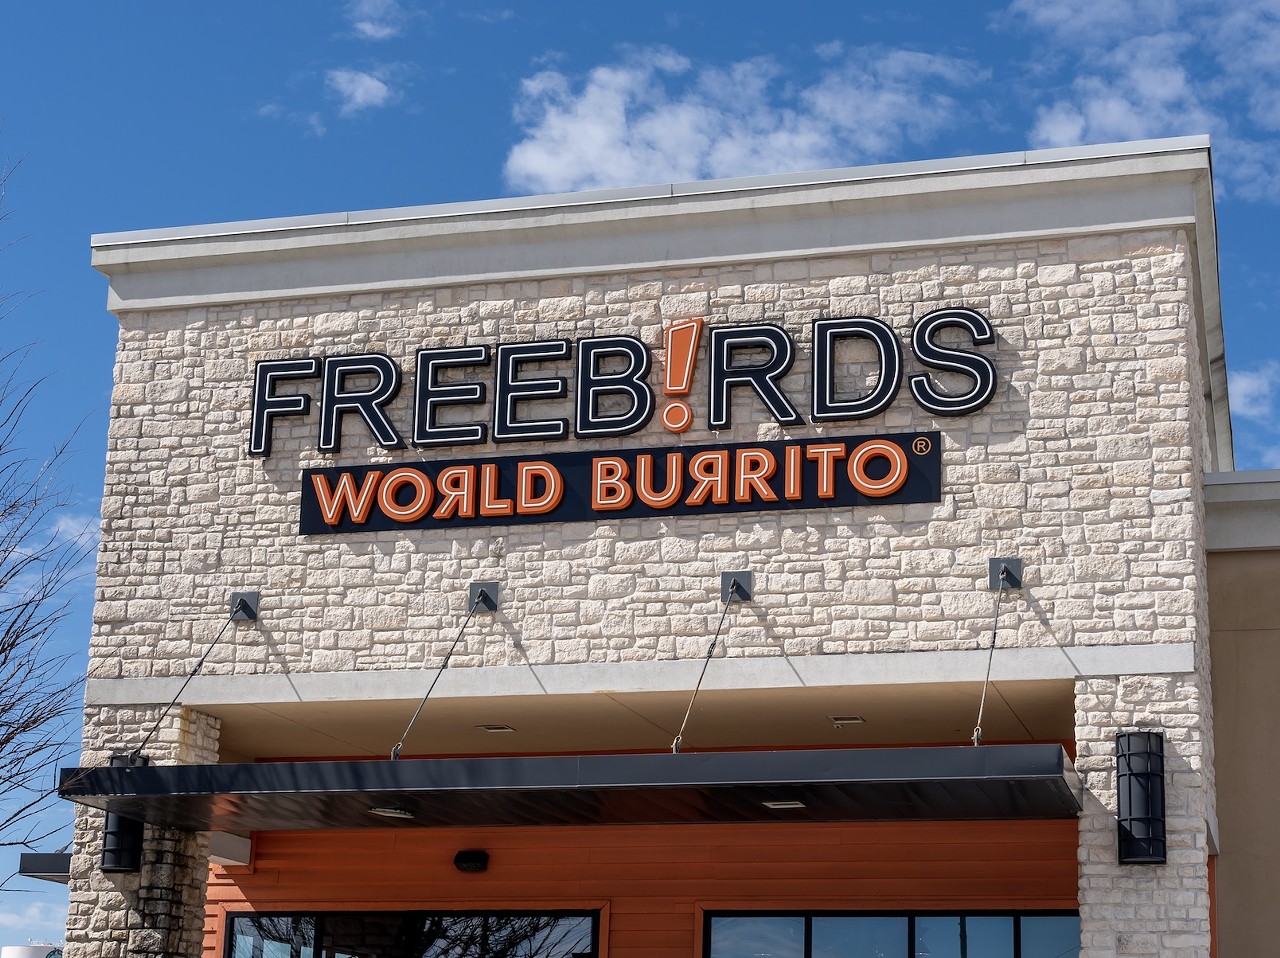 Freebird’s World Burrito
Multiple Locations, freebirds.com
Although originally founded in 1987 in Santa Barbara, CA, in 2015, Freebirds moved its official HQ down to Austin. Now with over 60 Texas locations and the slogan “Texas’s #1 Burrito,” it appears Freebird’s has made the lone star state its permanent residence.